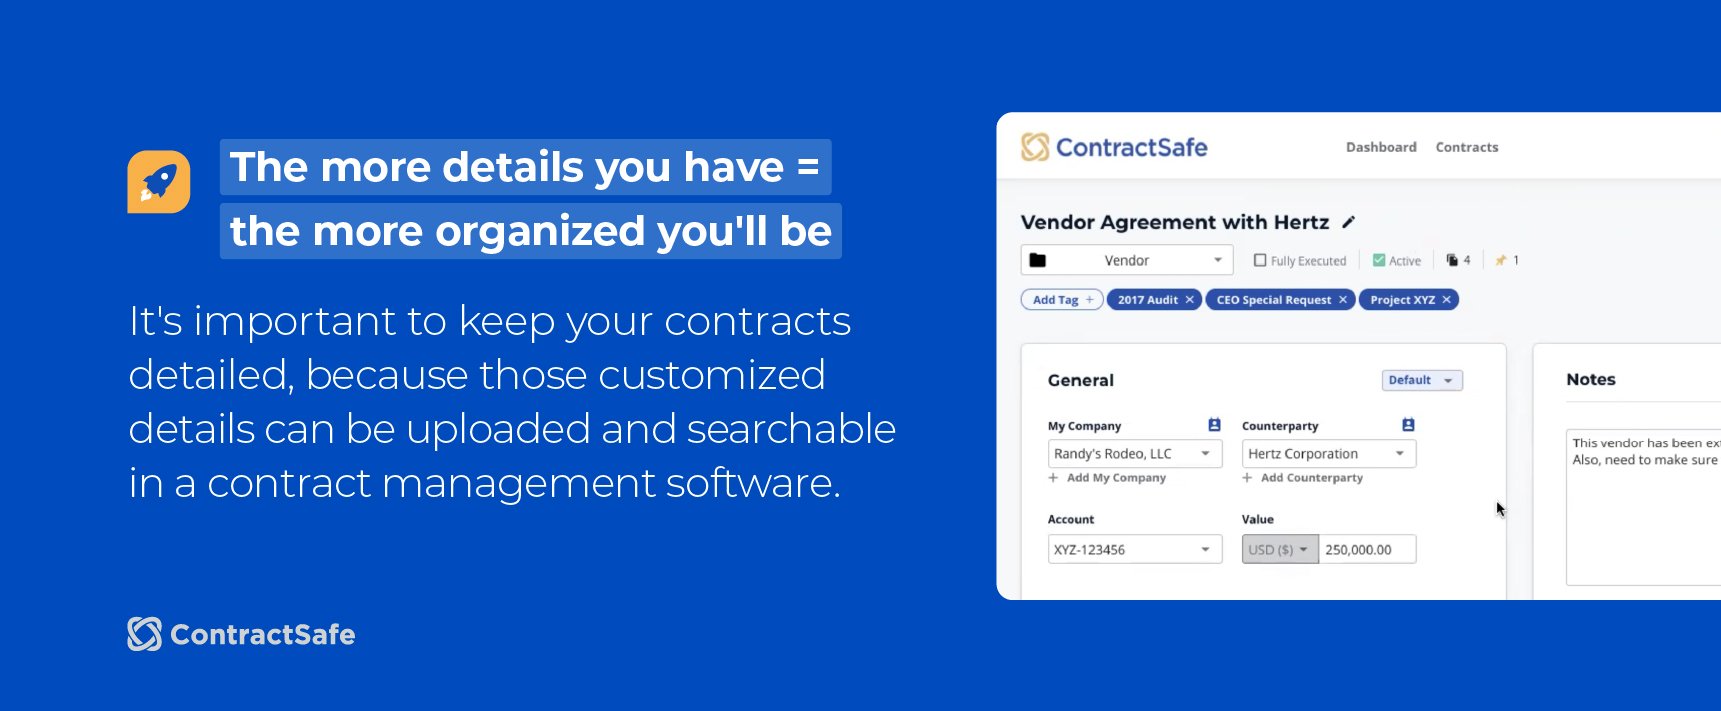 The more details you have = the more organized you'll be. It's important to keep your contracts detailed, because those customized details can be uploaded and searchable in a contract management software. 